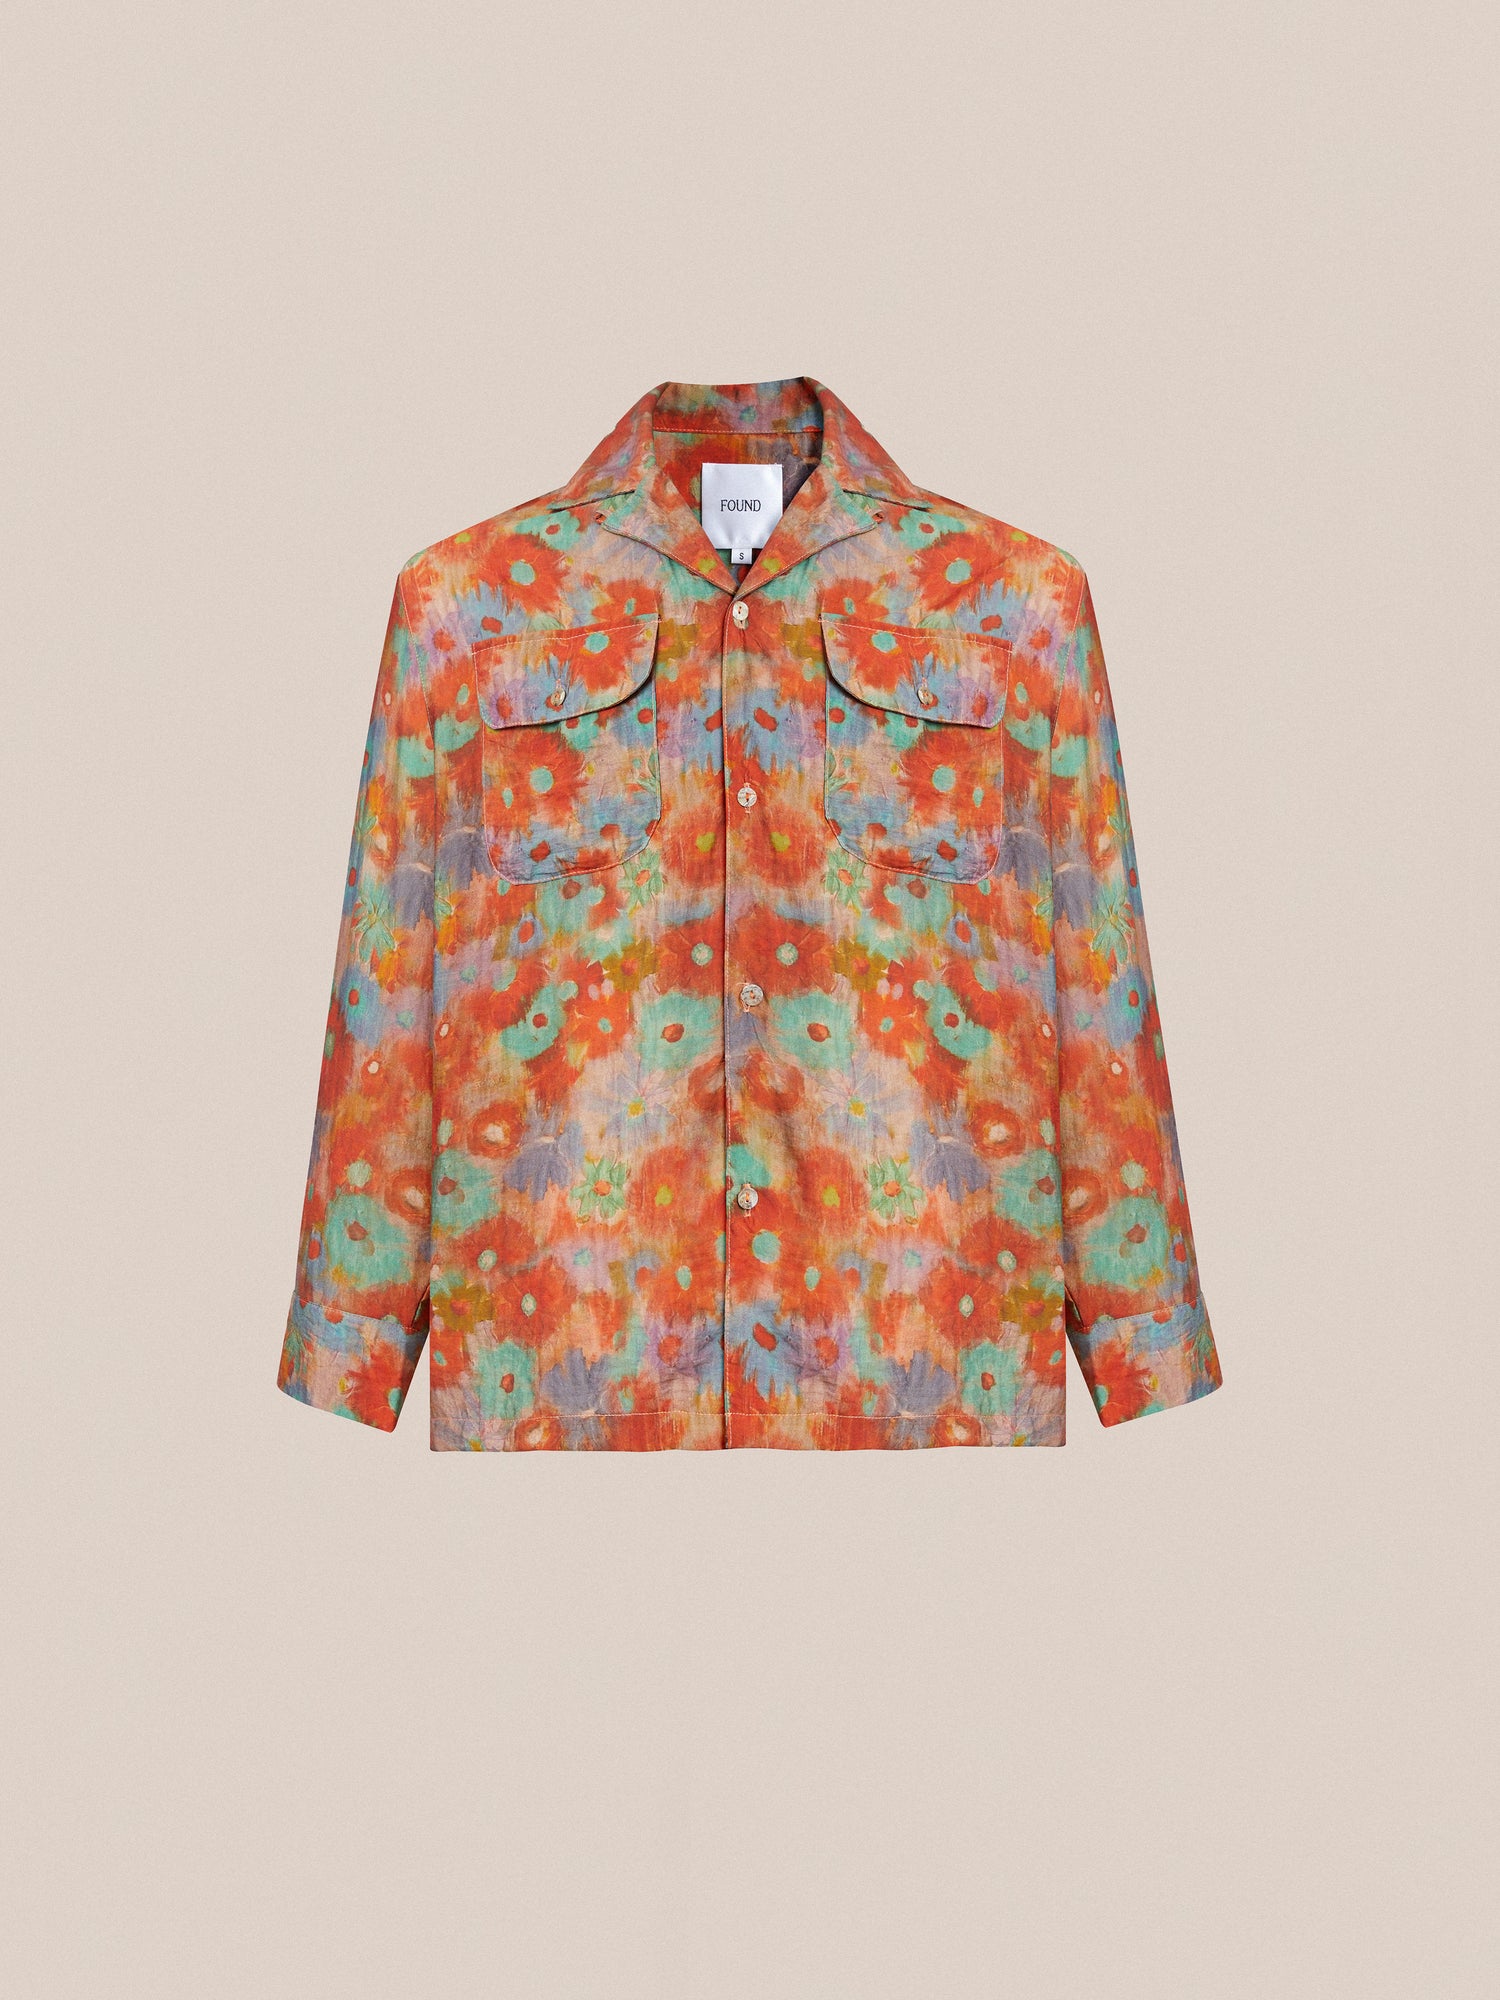 An Waterblend LS Camp Shirt with a classic appeal and a floral print.